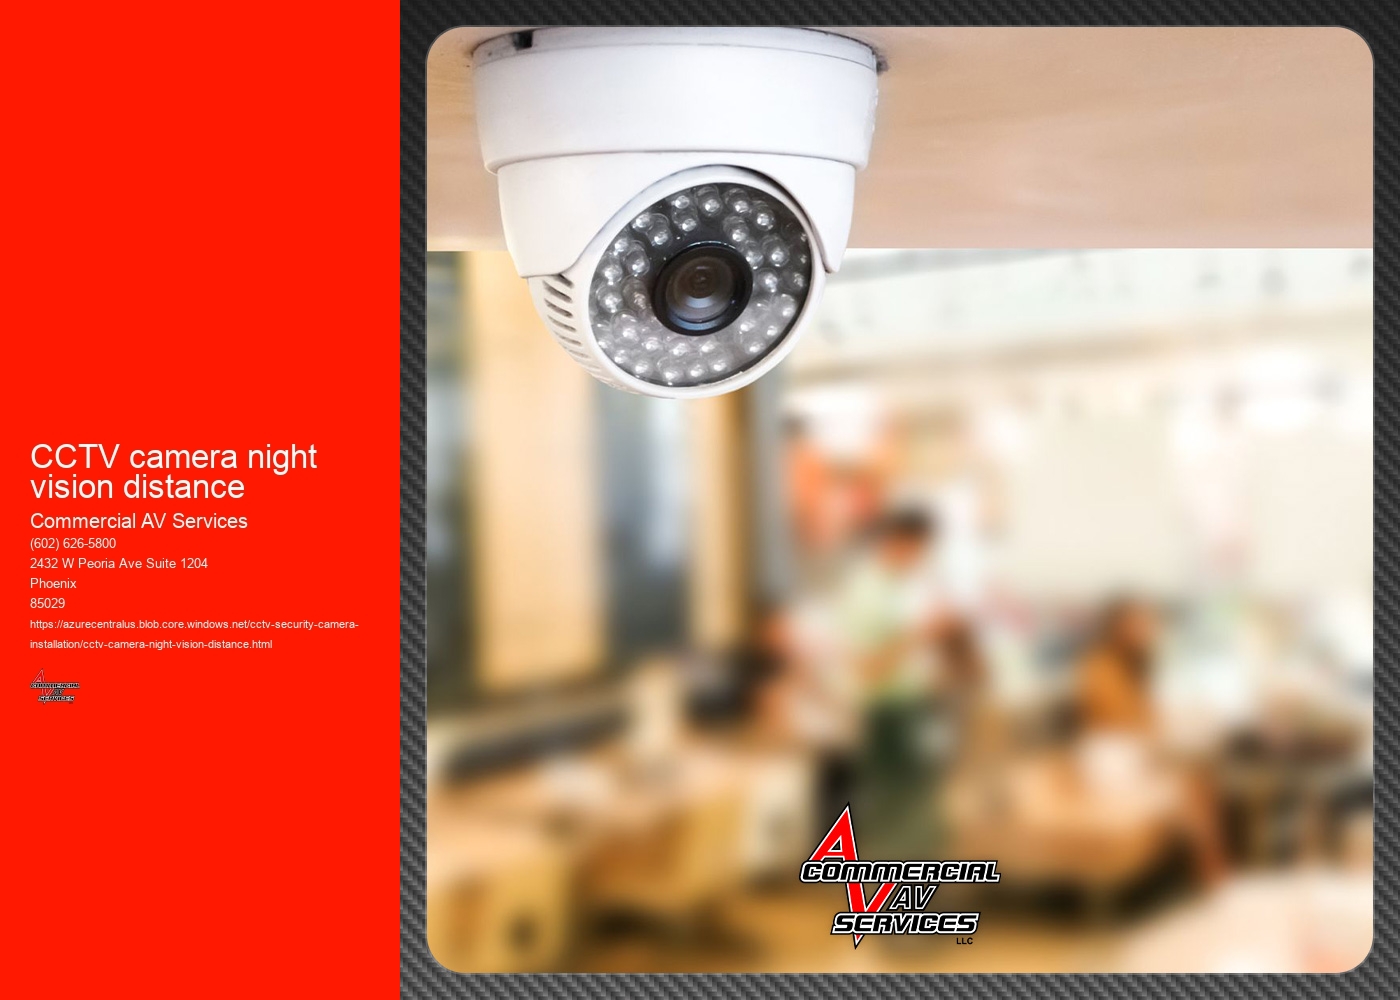 What factors can affect the clarity and range of night vision in CCTV cameras?